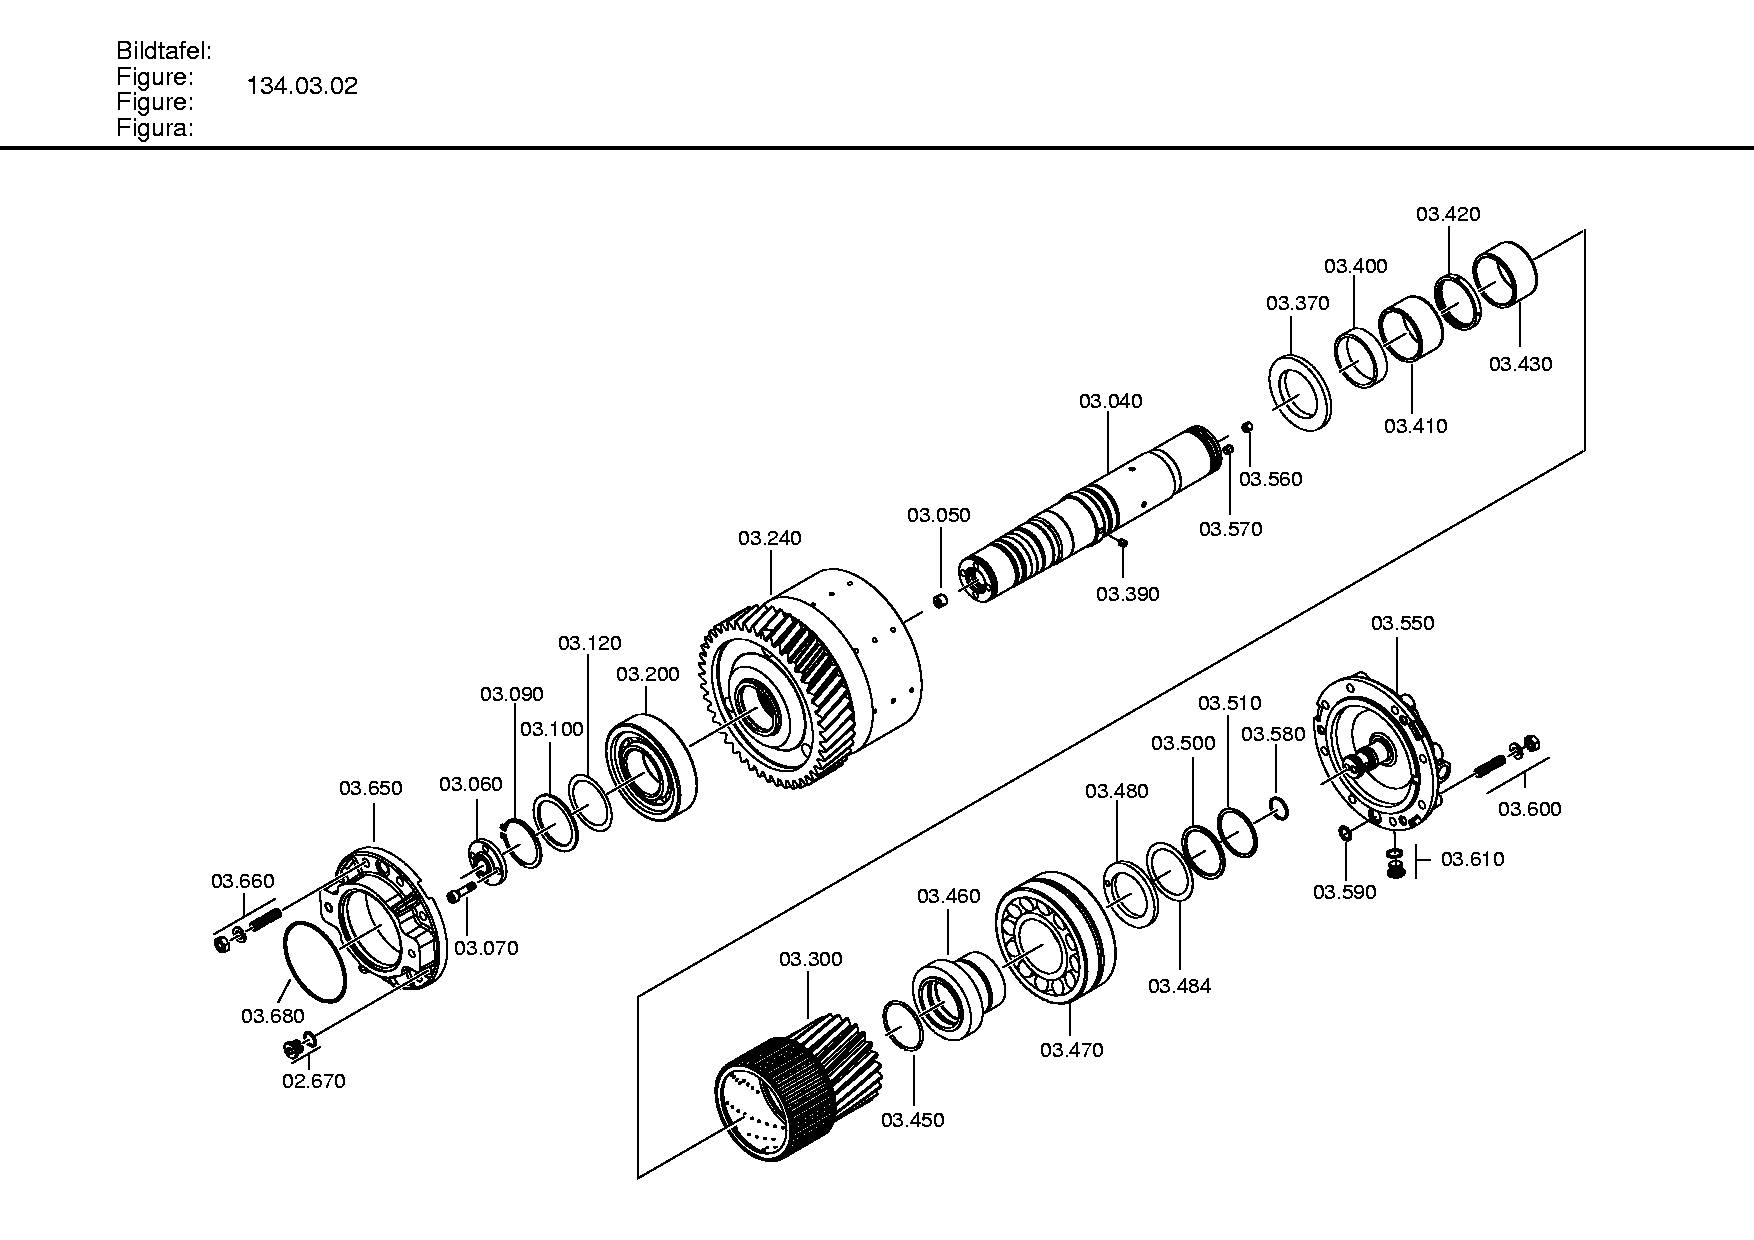 drawing for NACCO-IRV 8062646 - R-RING (figure 2)